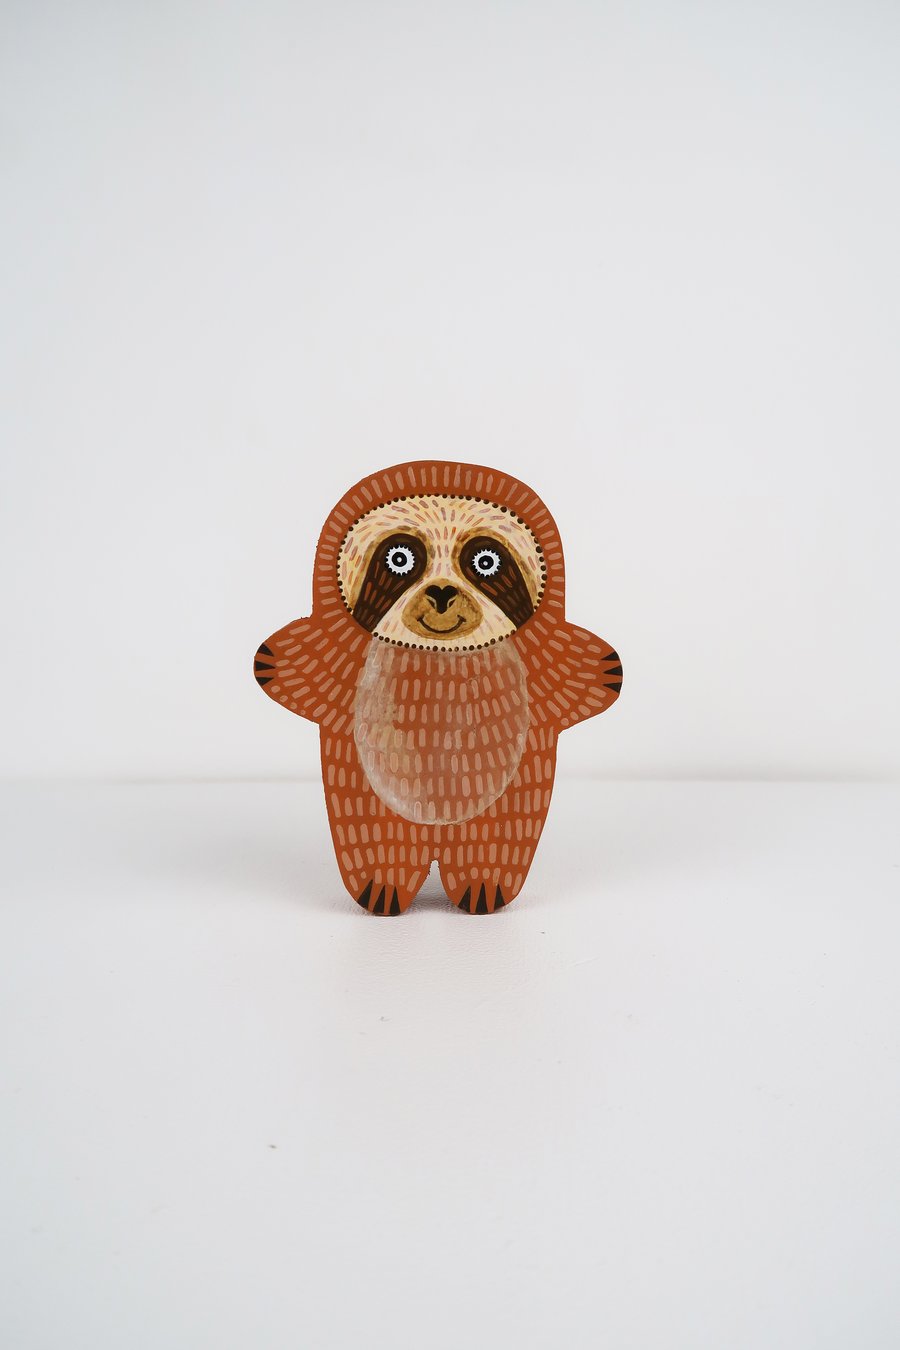 SLOTH wooden ornament, cute home decor, animal lover gift